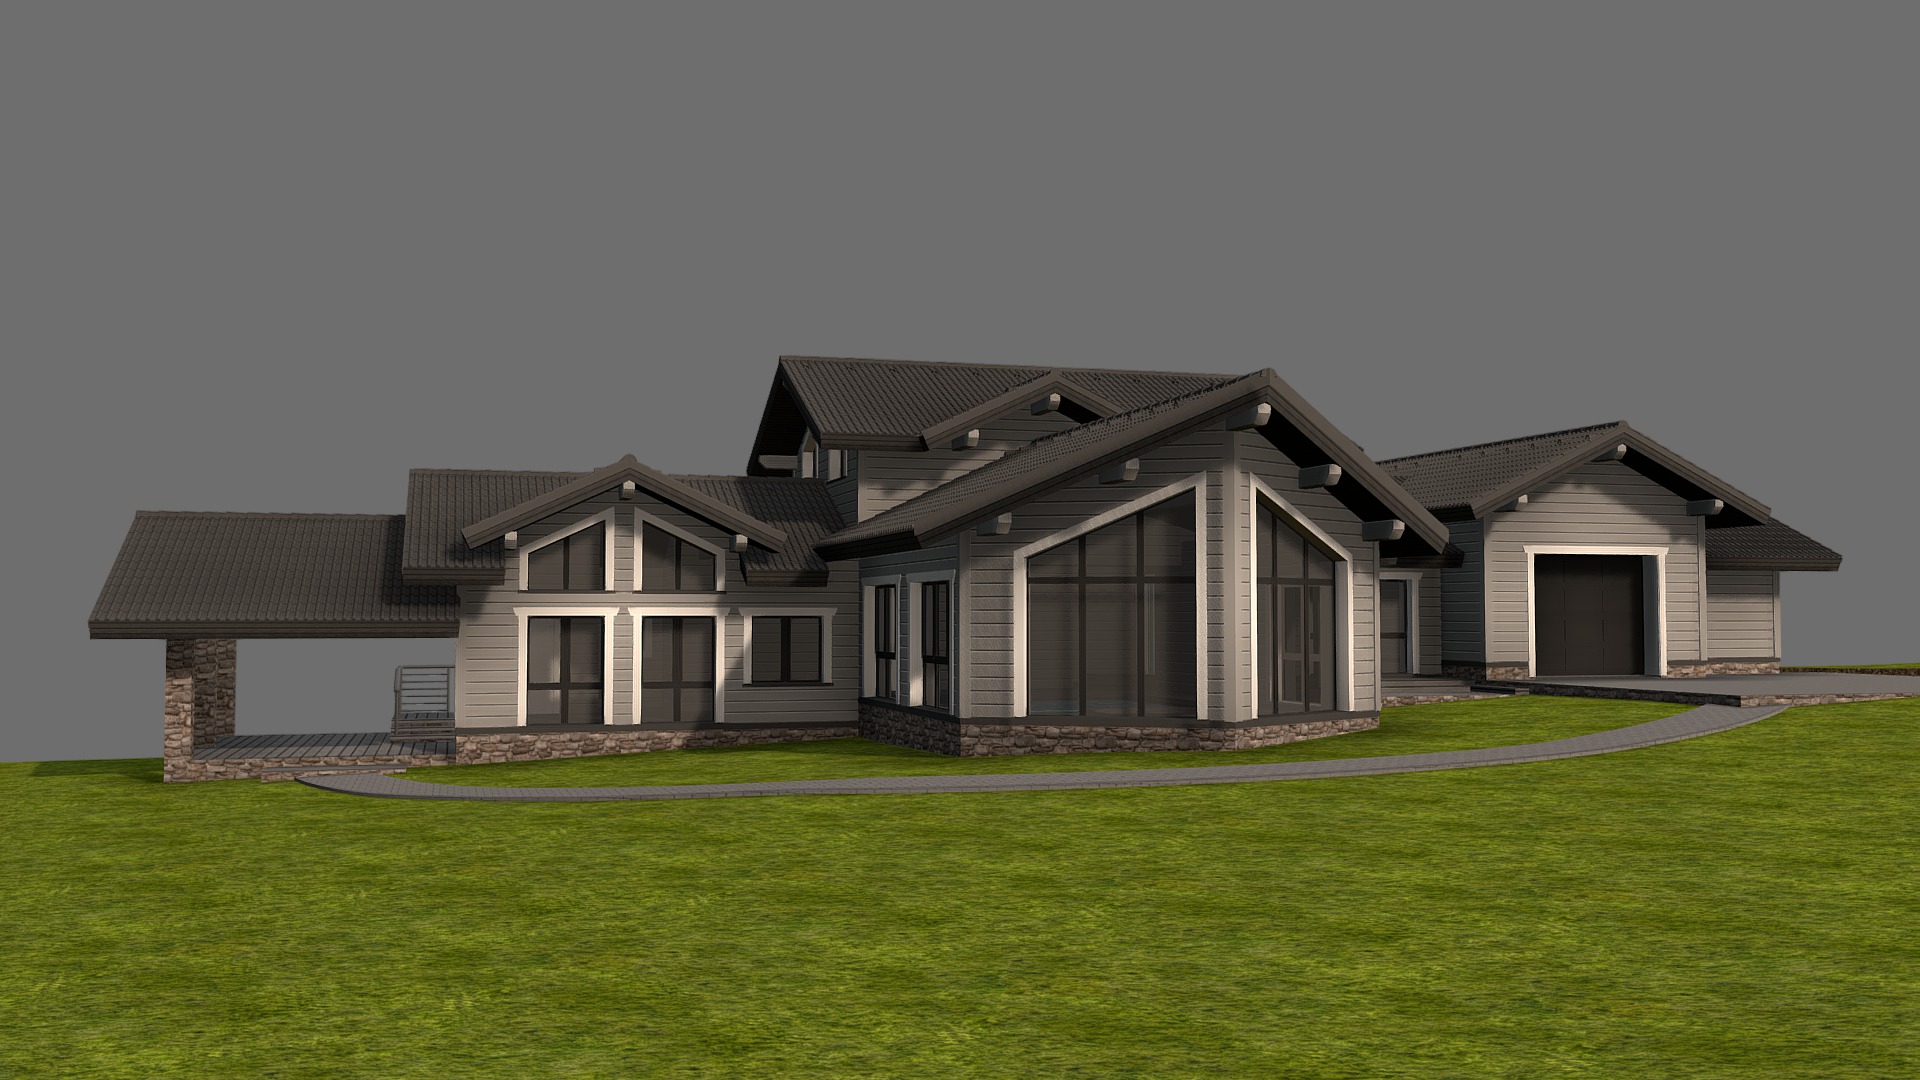 3D model Банный комплекс 1.0 - This is a 3D model of the Банный комплекс 1.0. The 3D model is about a row of houses with Olson House in the background.